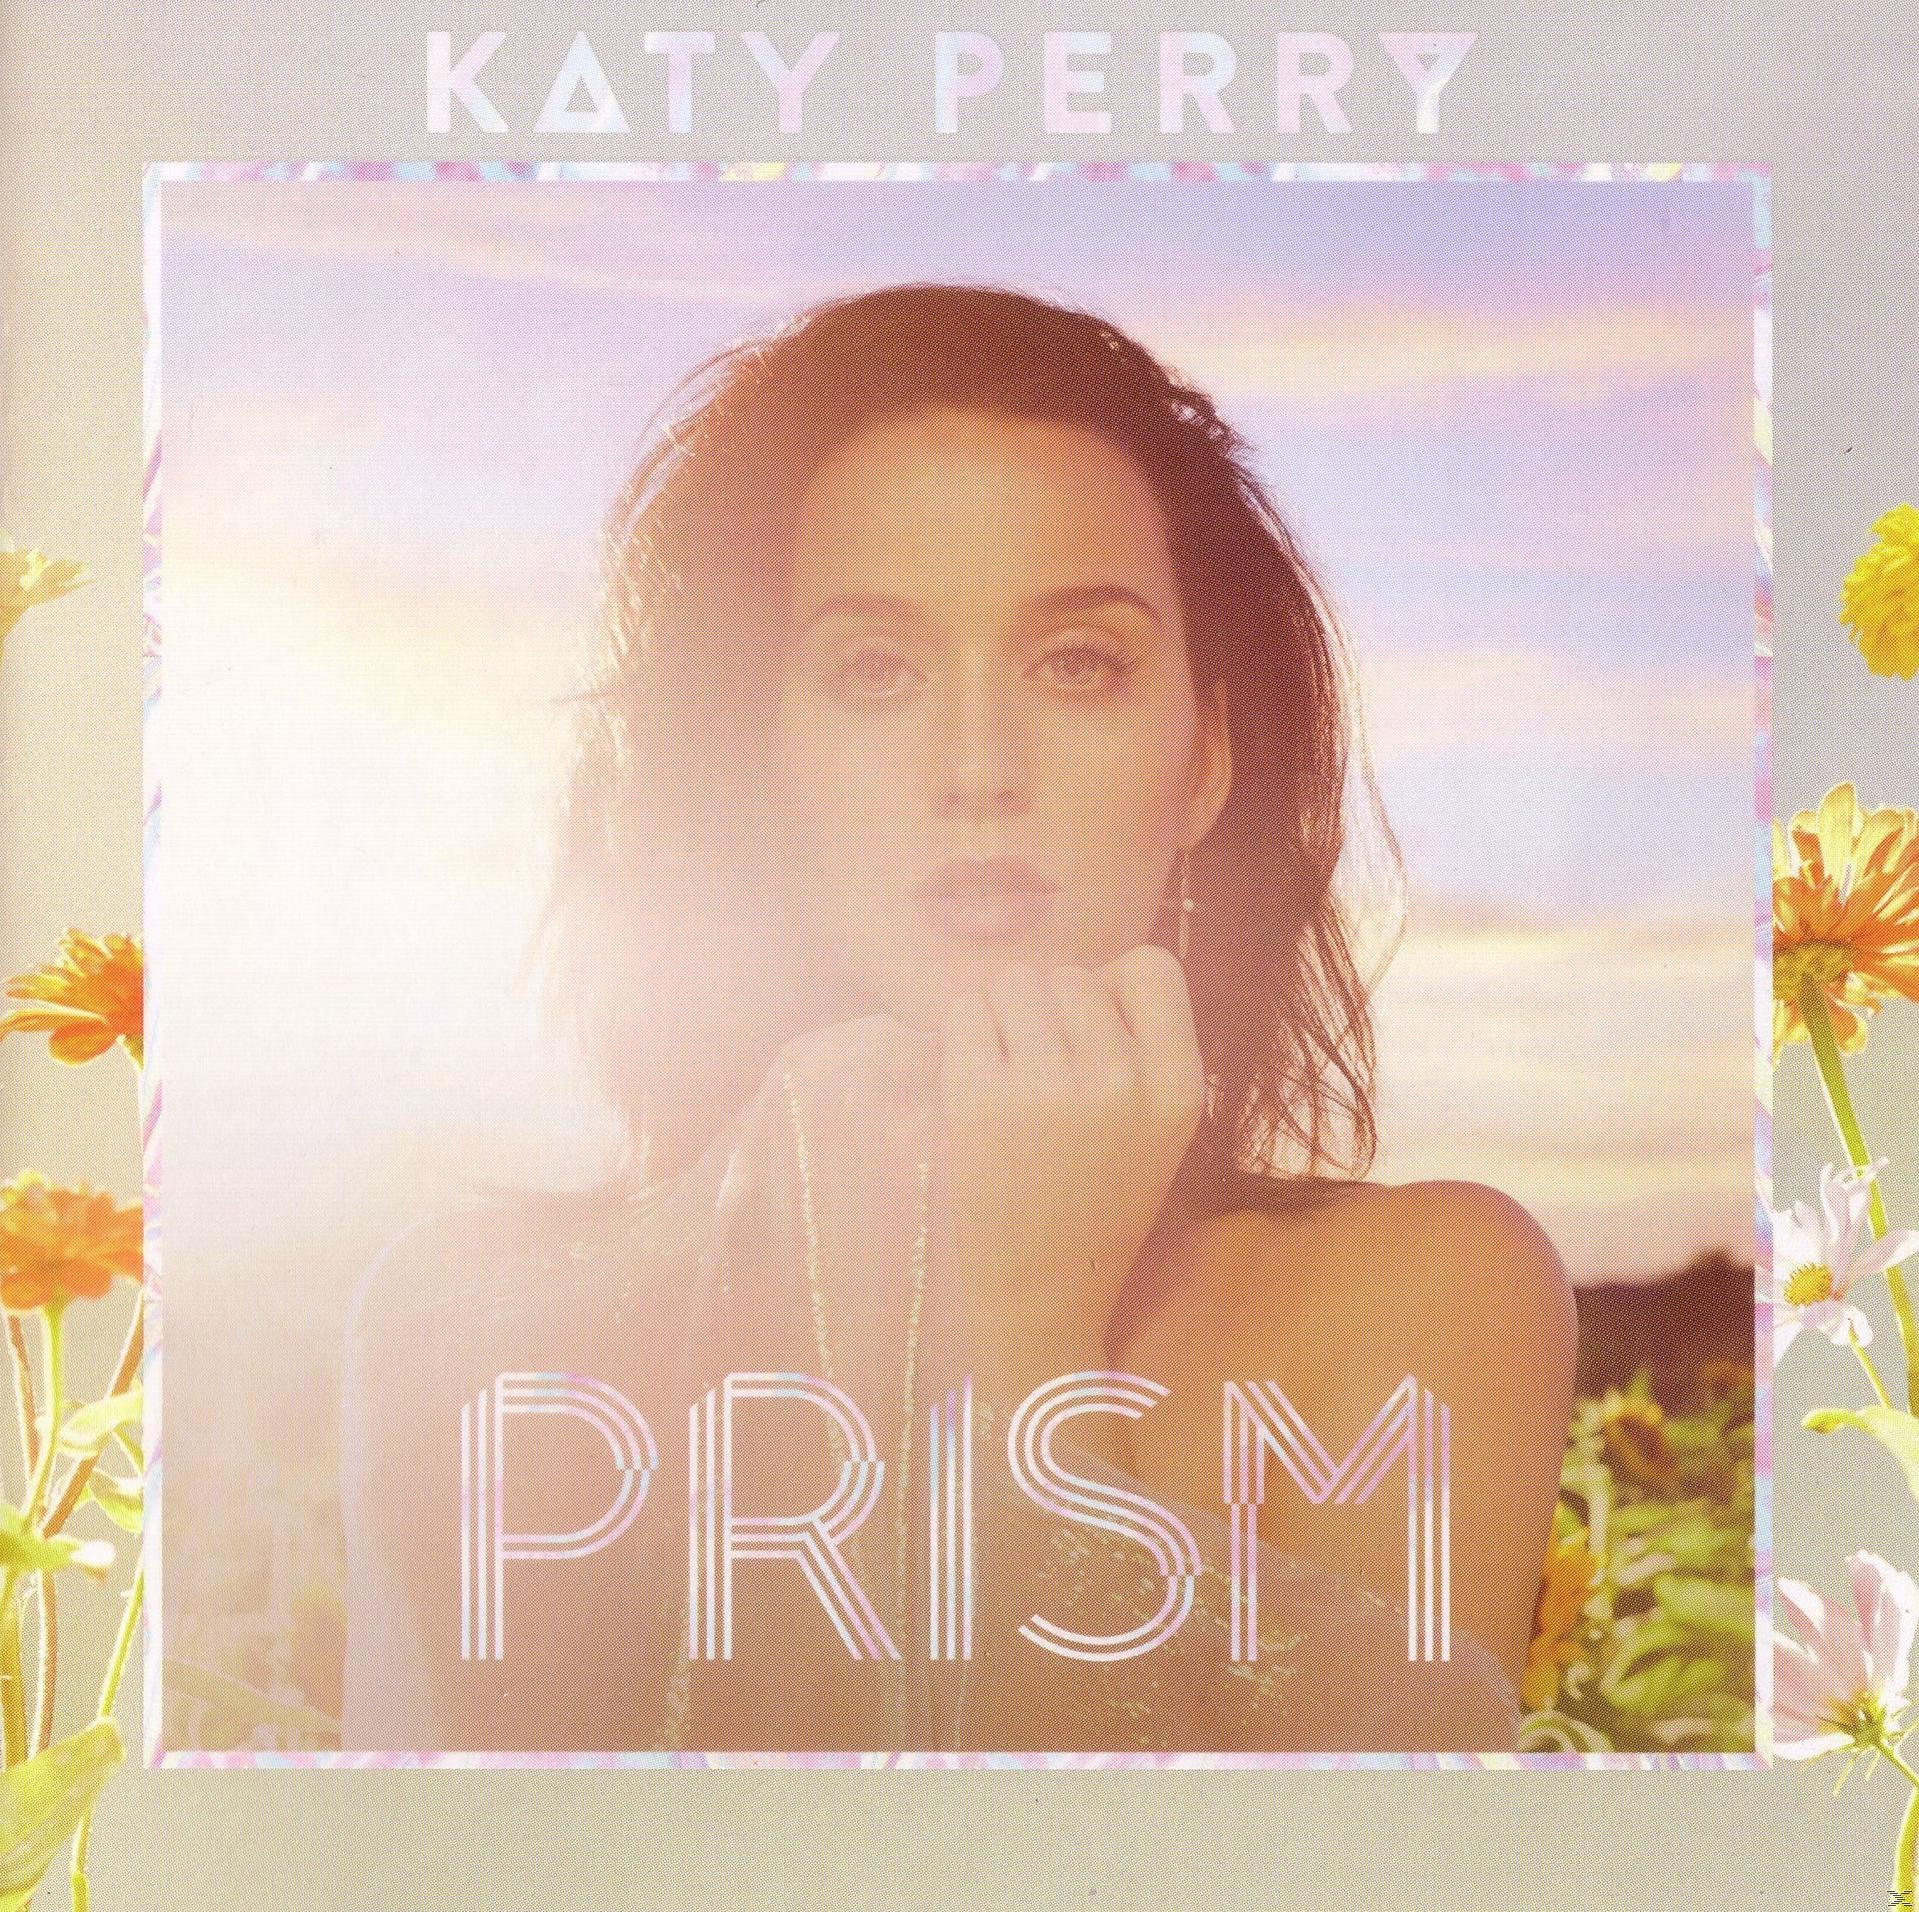 Prism Perry (CD) - - Katy